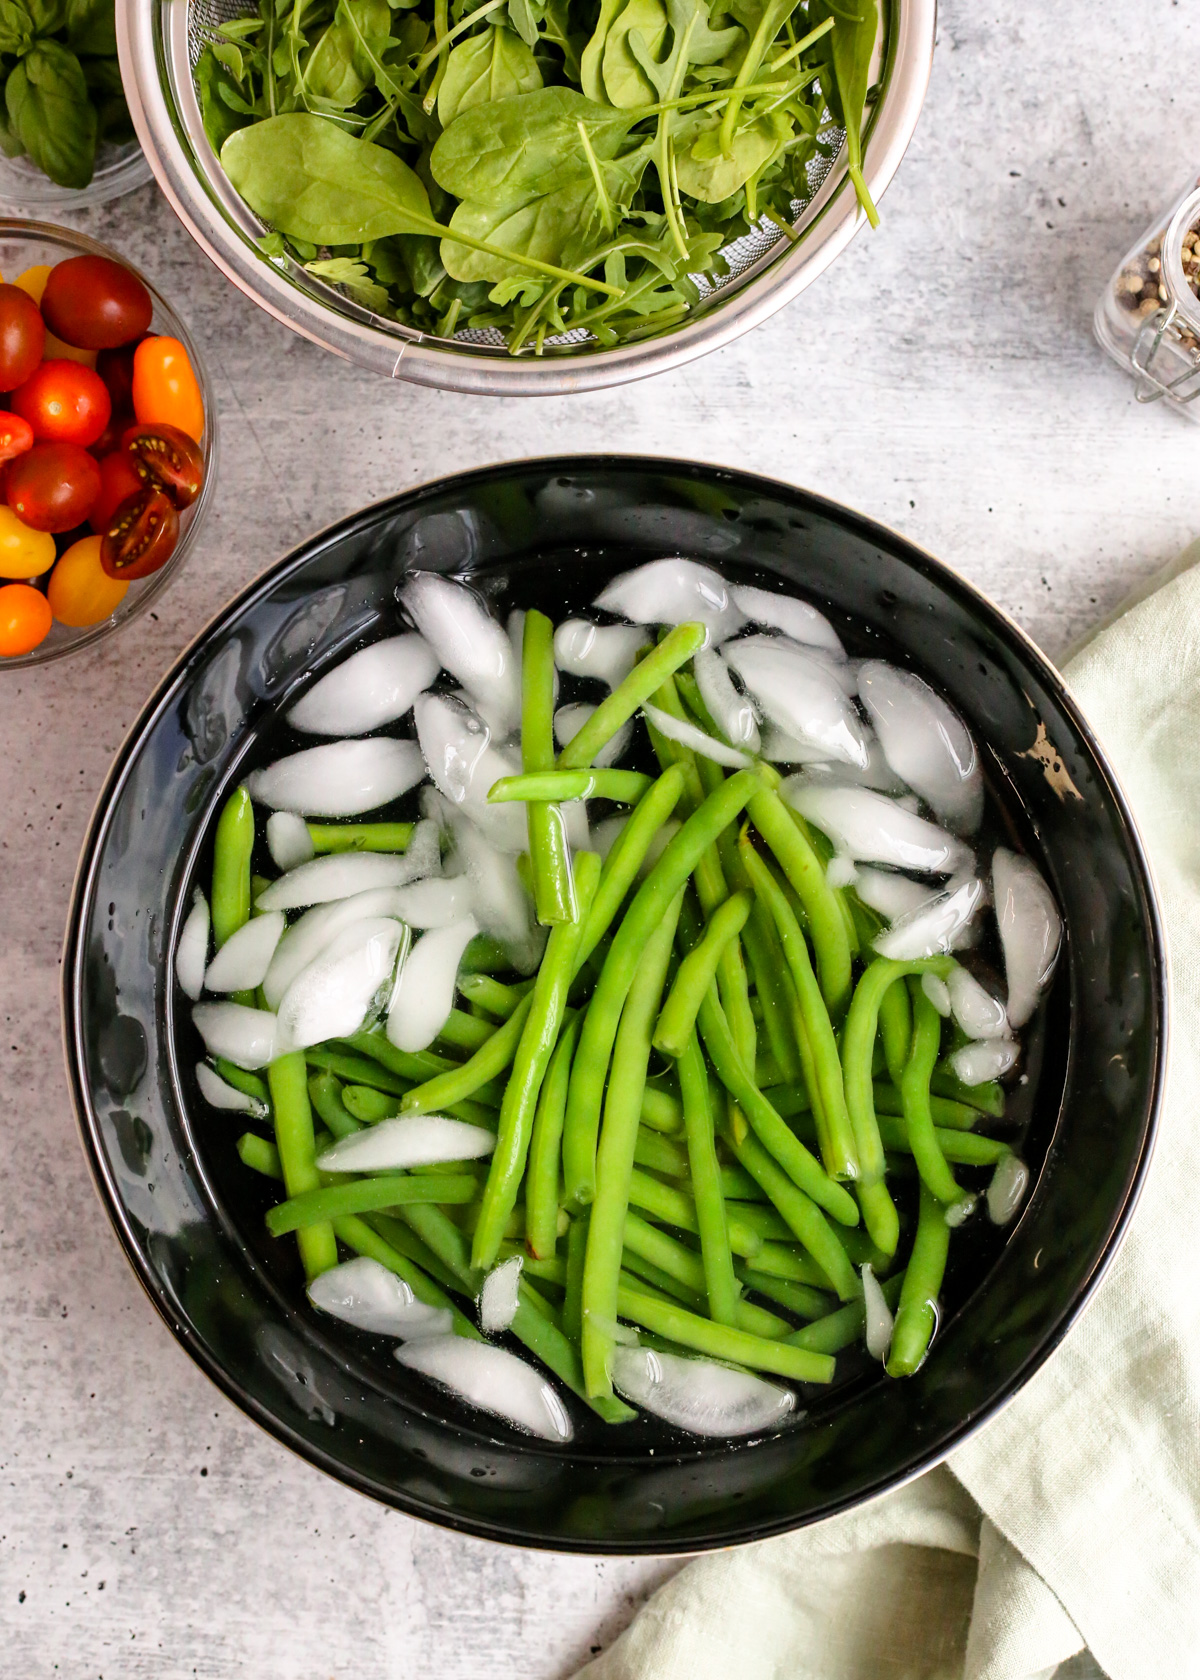 Overhead view of a black ceramic bowl filled with blanched green beans surrounded by water and ice cubes. The green beans are partially cooked but vibrant green and fresh looking